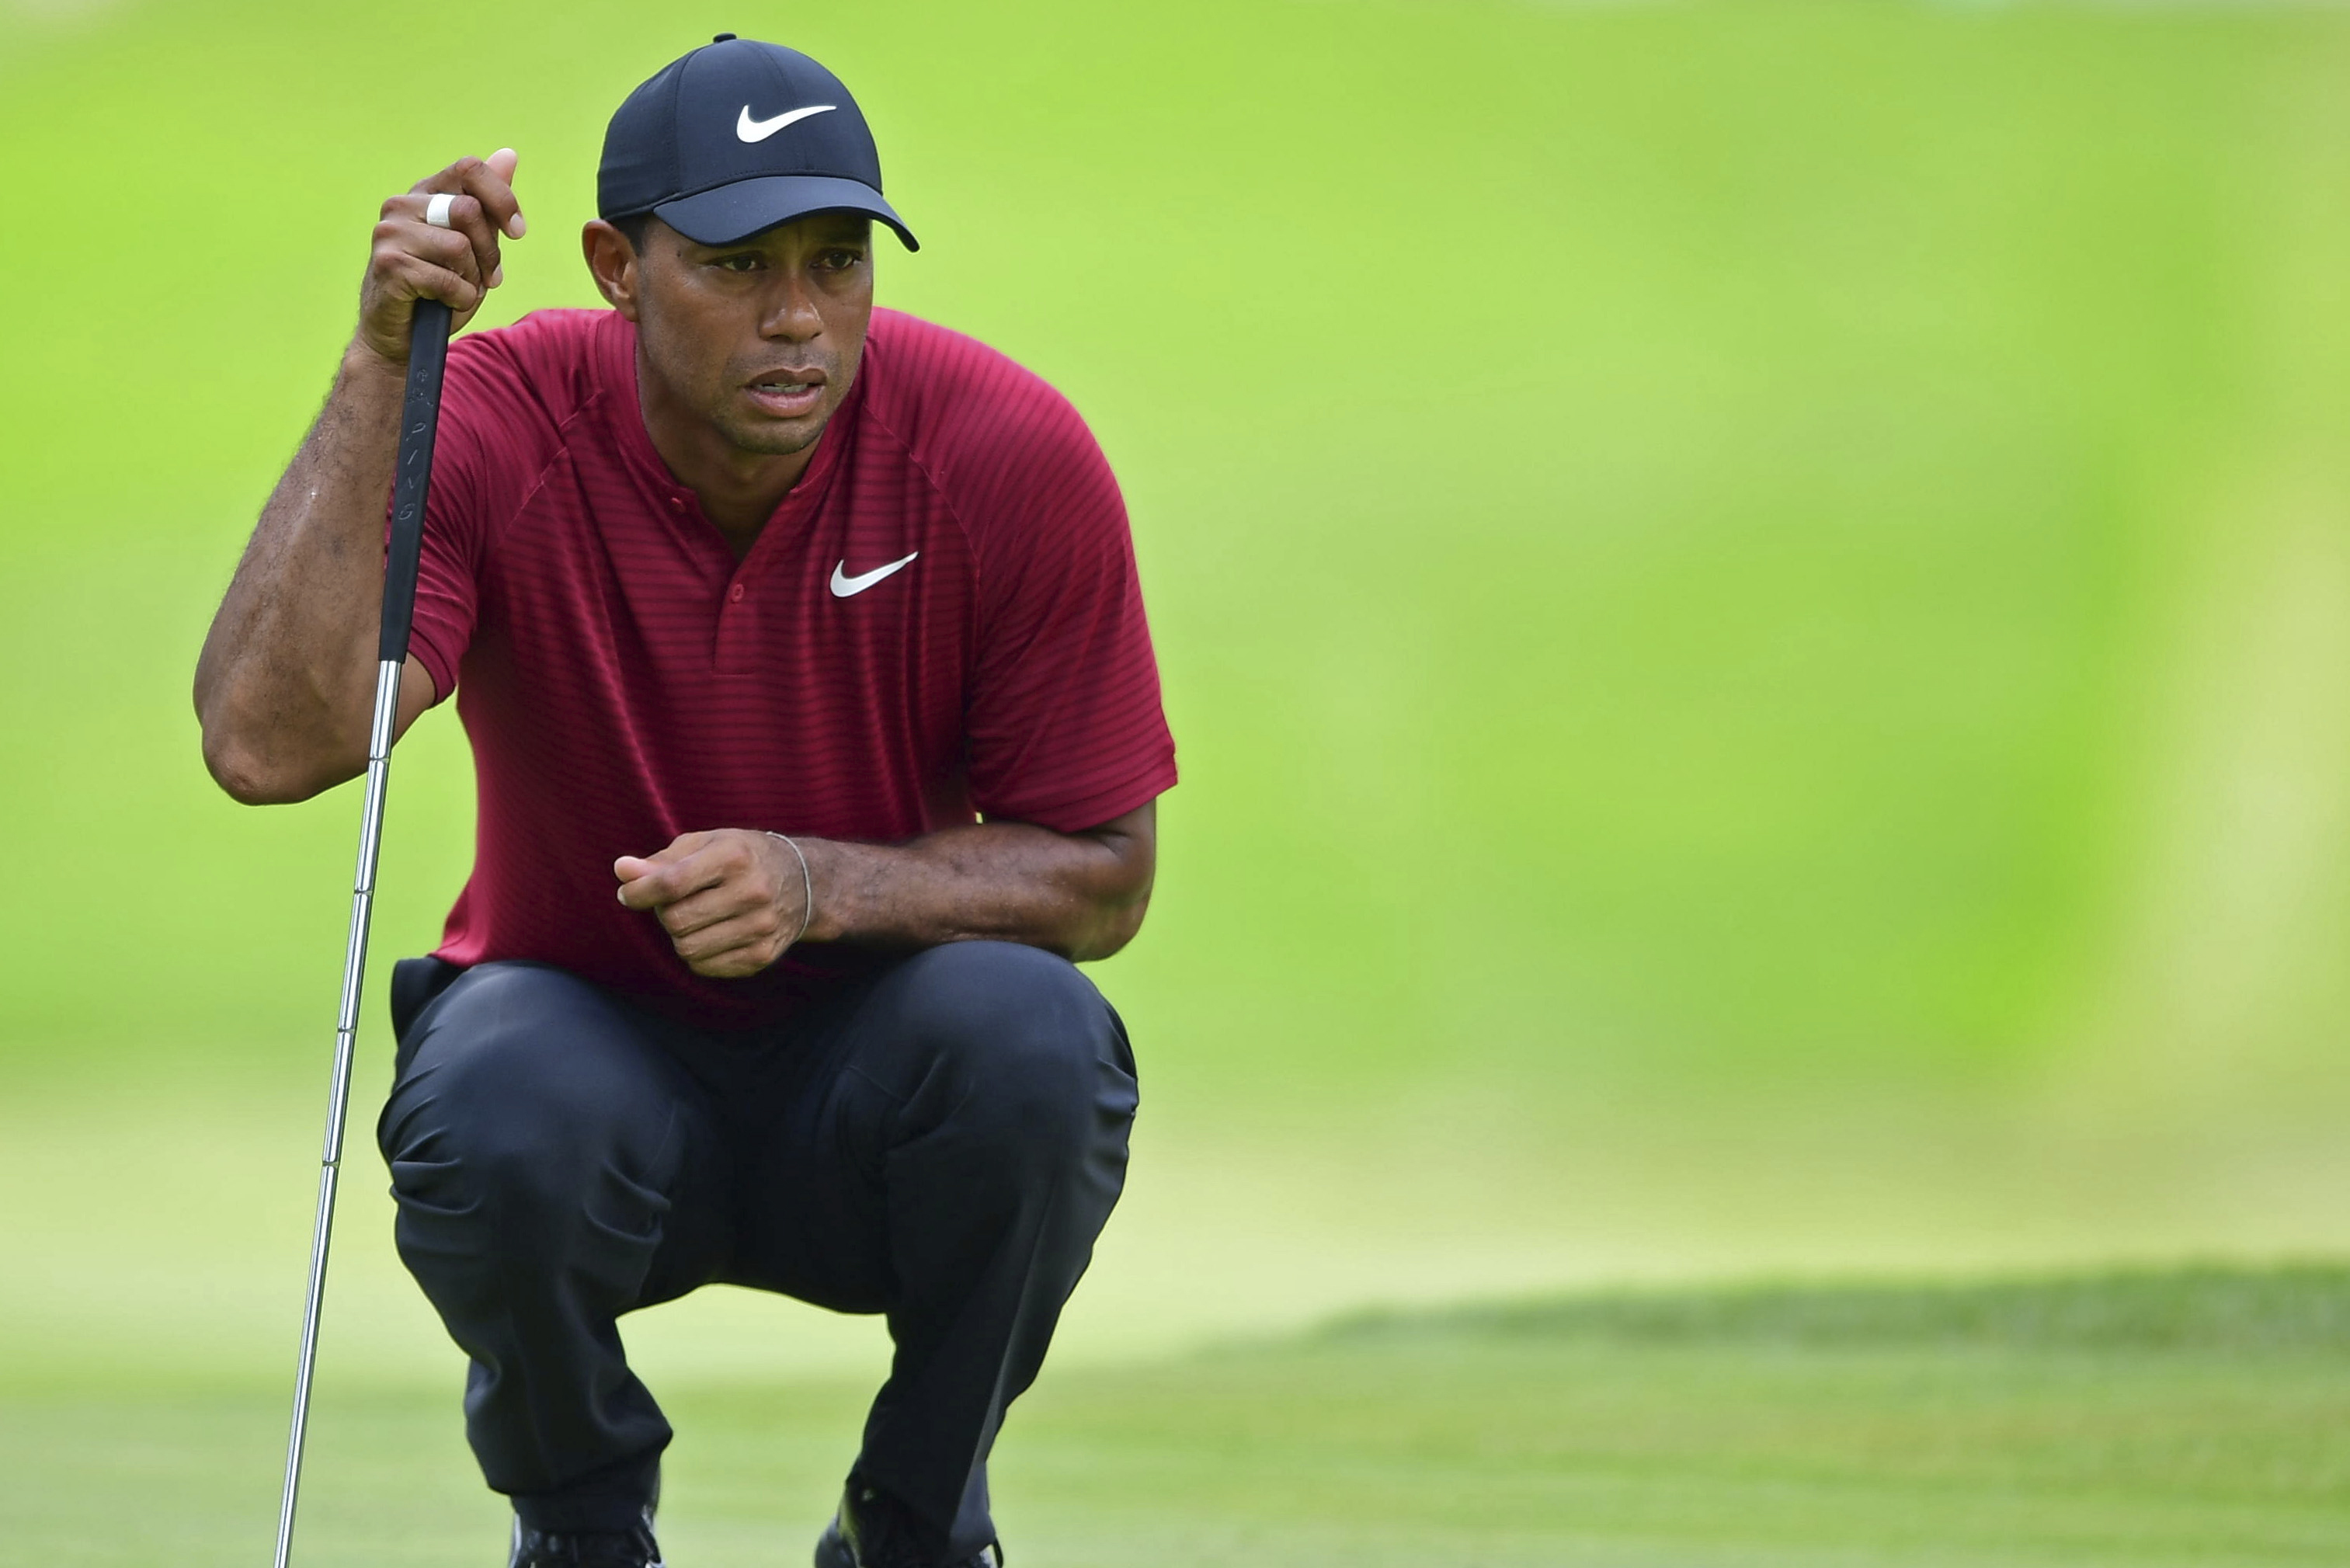 Tiger Woods Shoots 3 Over To Finish Rough Weekend At Bridgestone Invitational Bleacher Report Latest News Videos And Highlights